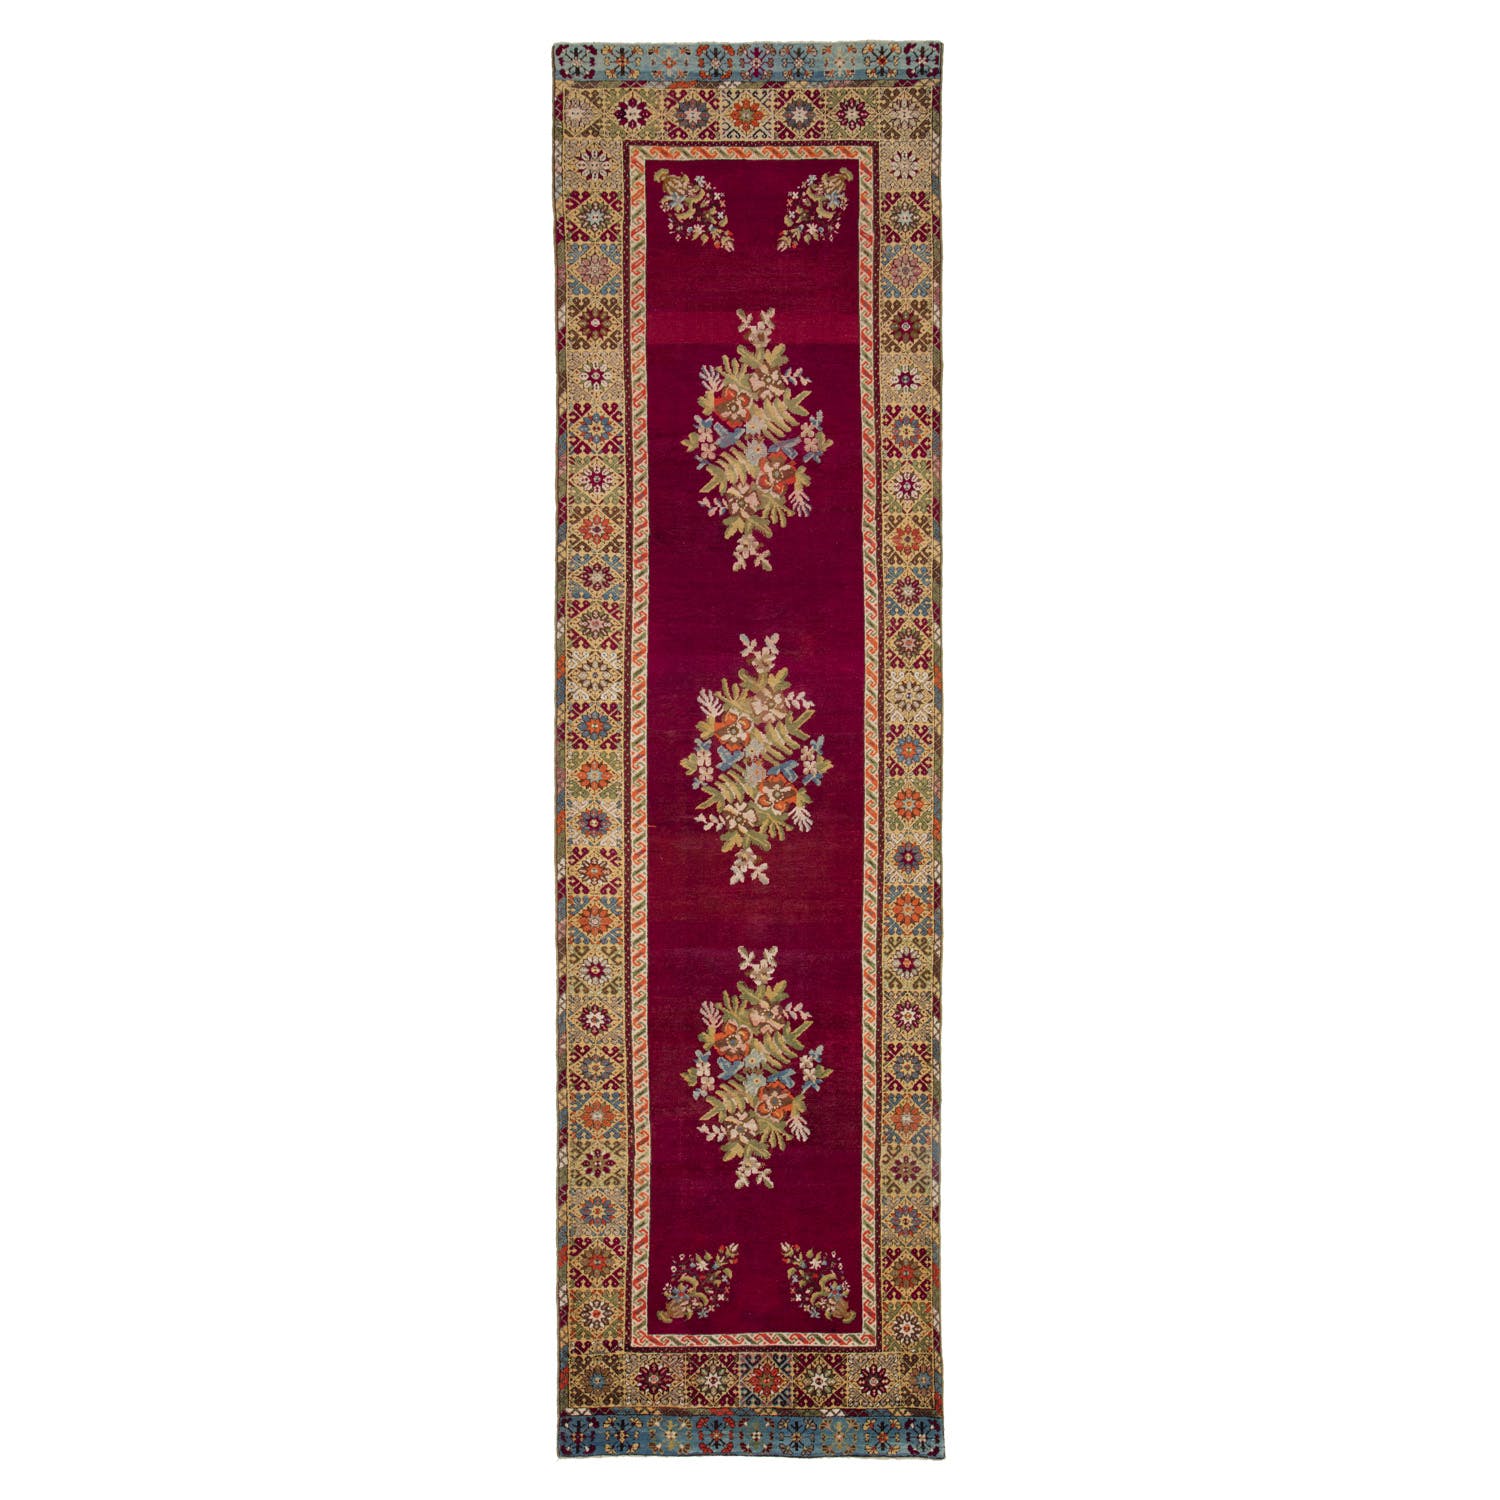 Rich maroon runner rug with symmetrical floral motifs and ornate border.